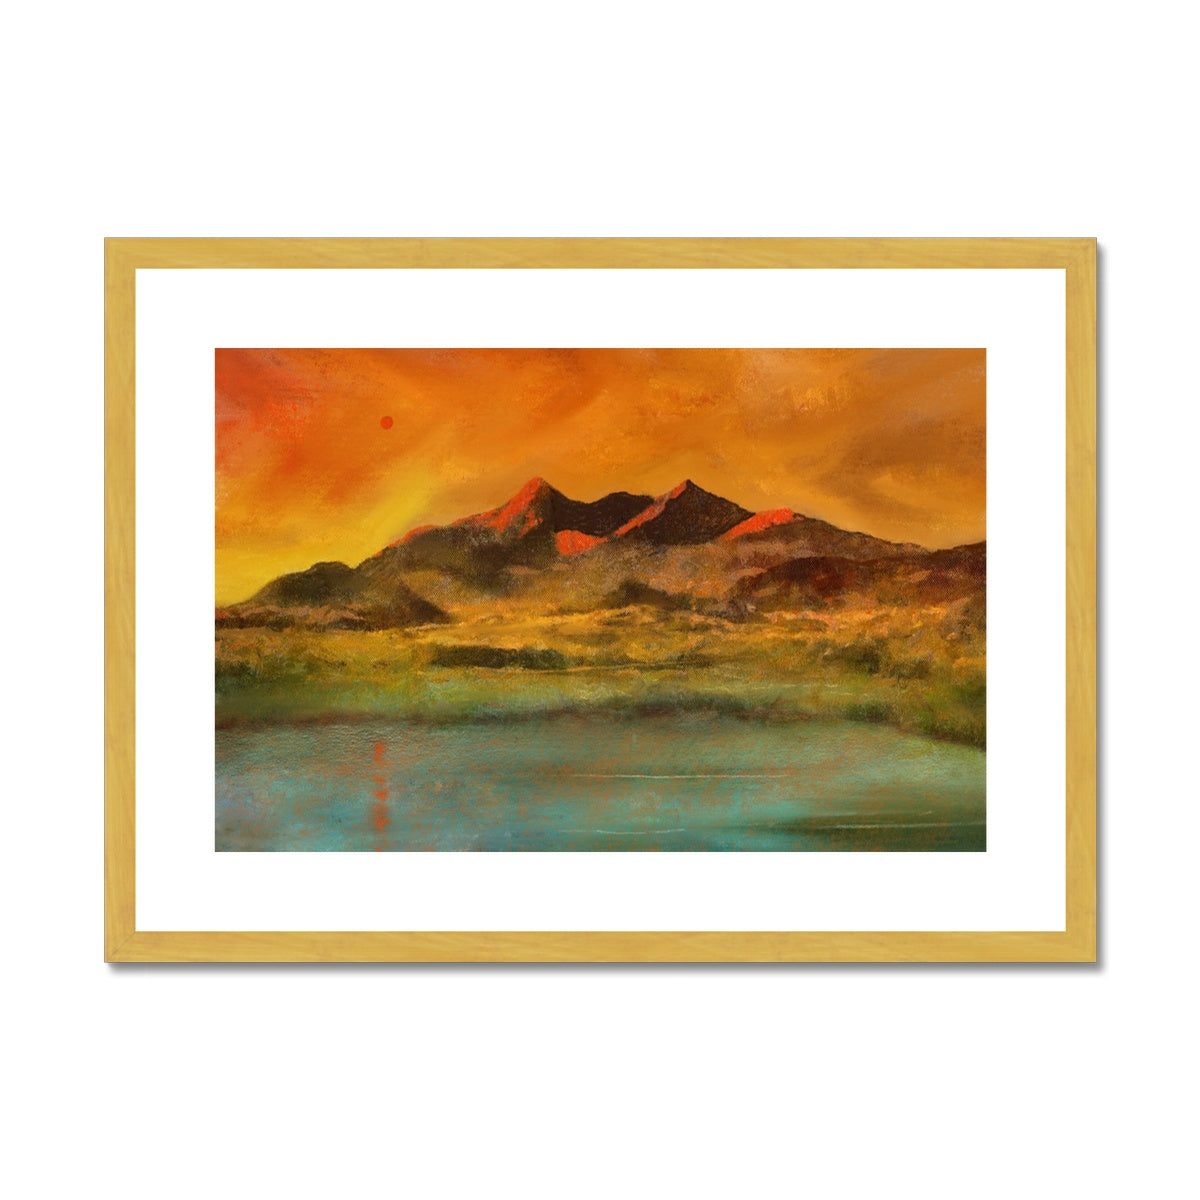 Skye Red Moon Cuillin Painting | Antique Framed & Mounted Prints From Scotland-Antique Framed & Mounted Prints-Skye Art Gallery-A2 Landscape-Gold Frame-Paintings, Prints, Homeware, Art Gifts From Scotland By Scottish Artist Kevin Hunter